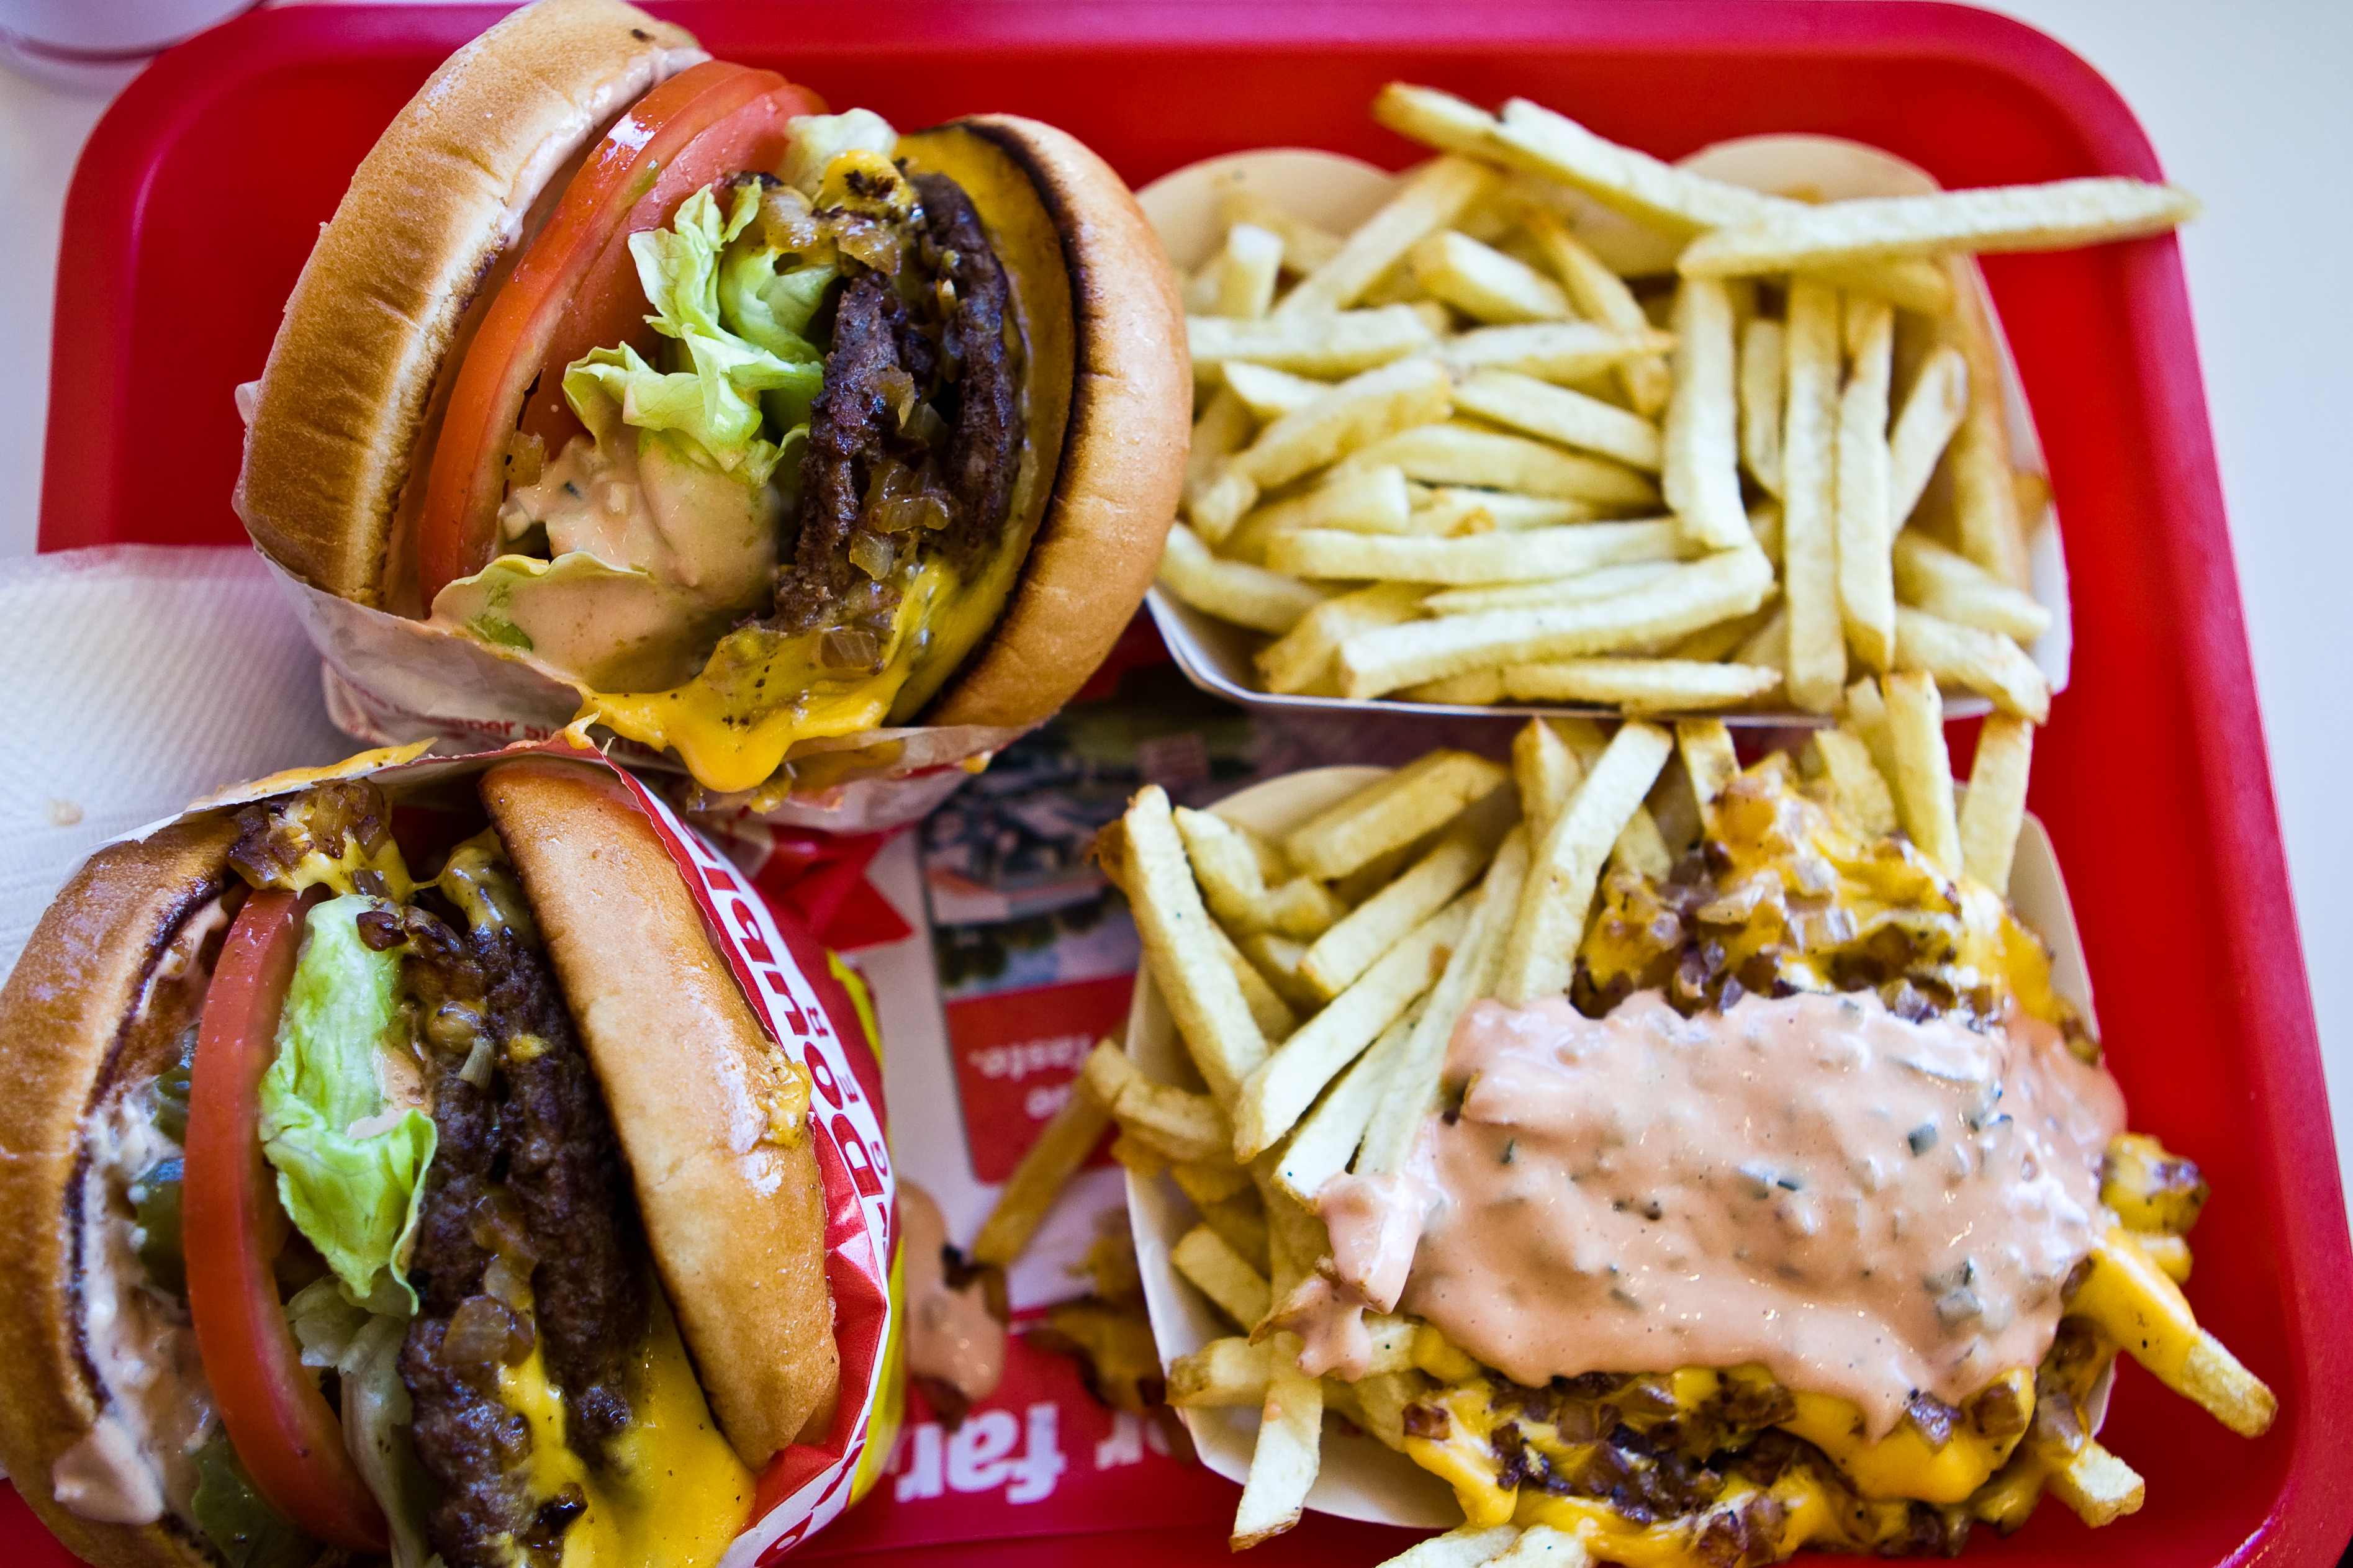 2 Double-doubles animal style with one animal style fries